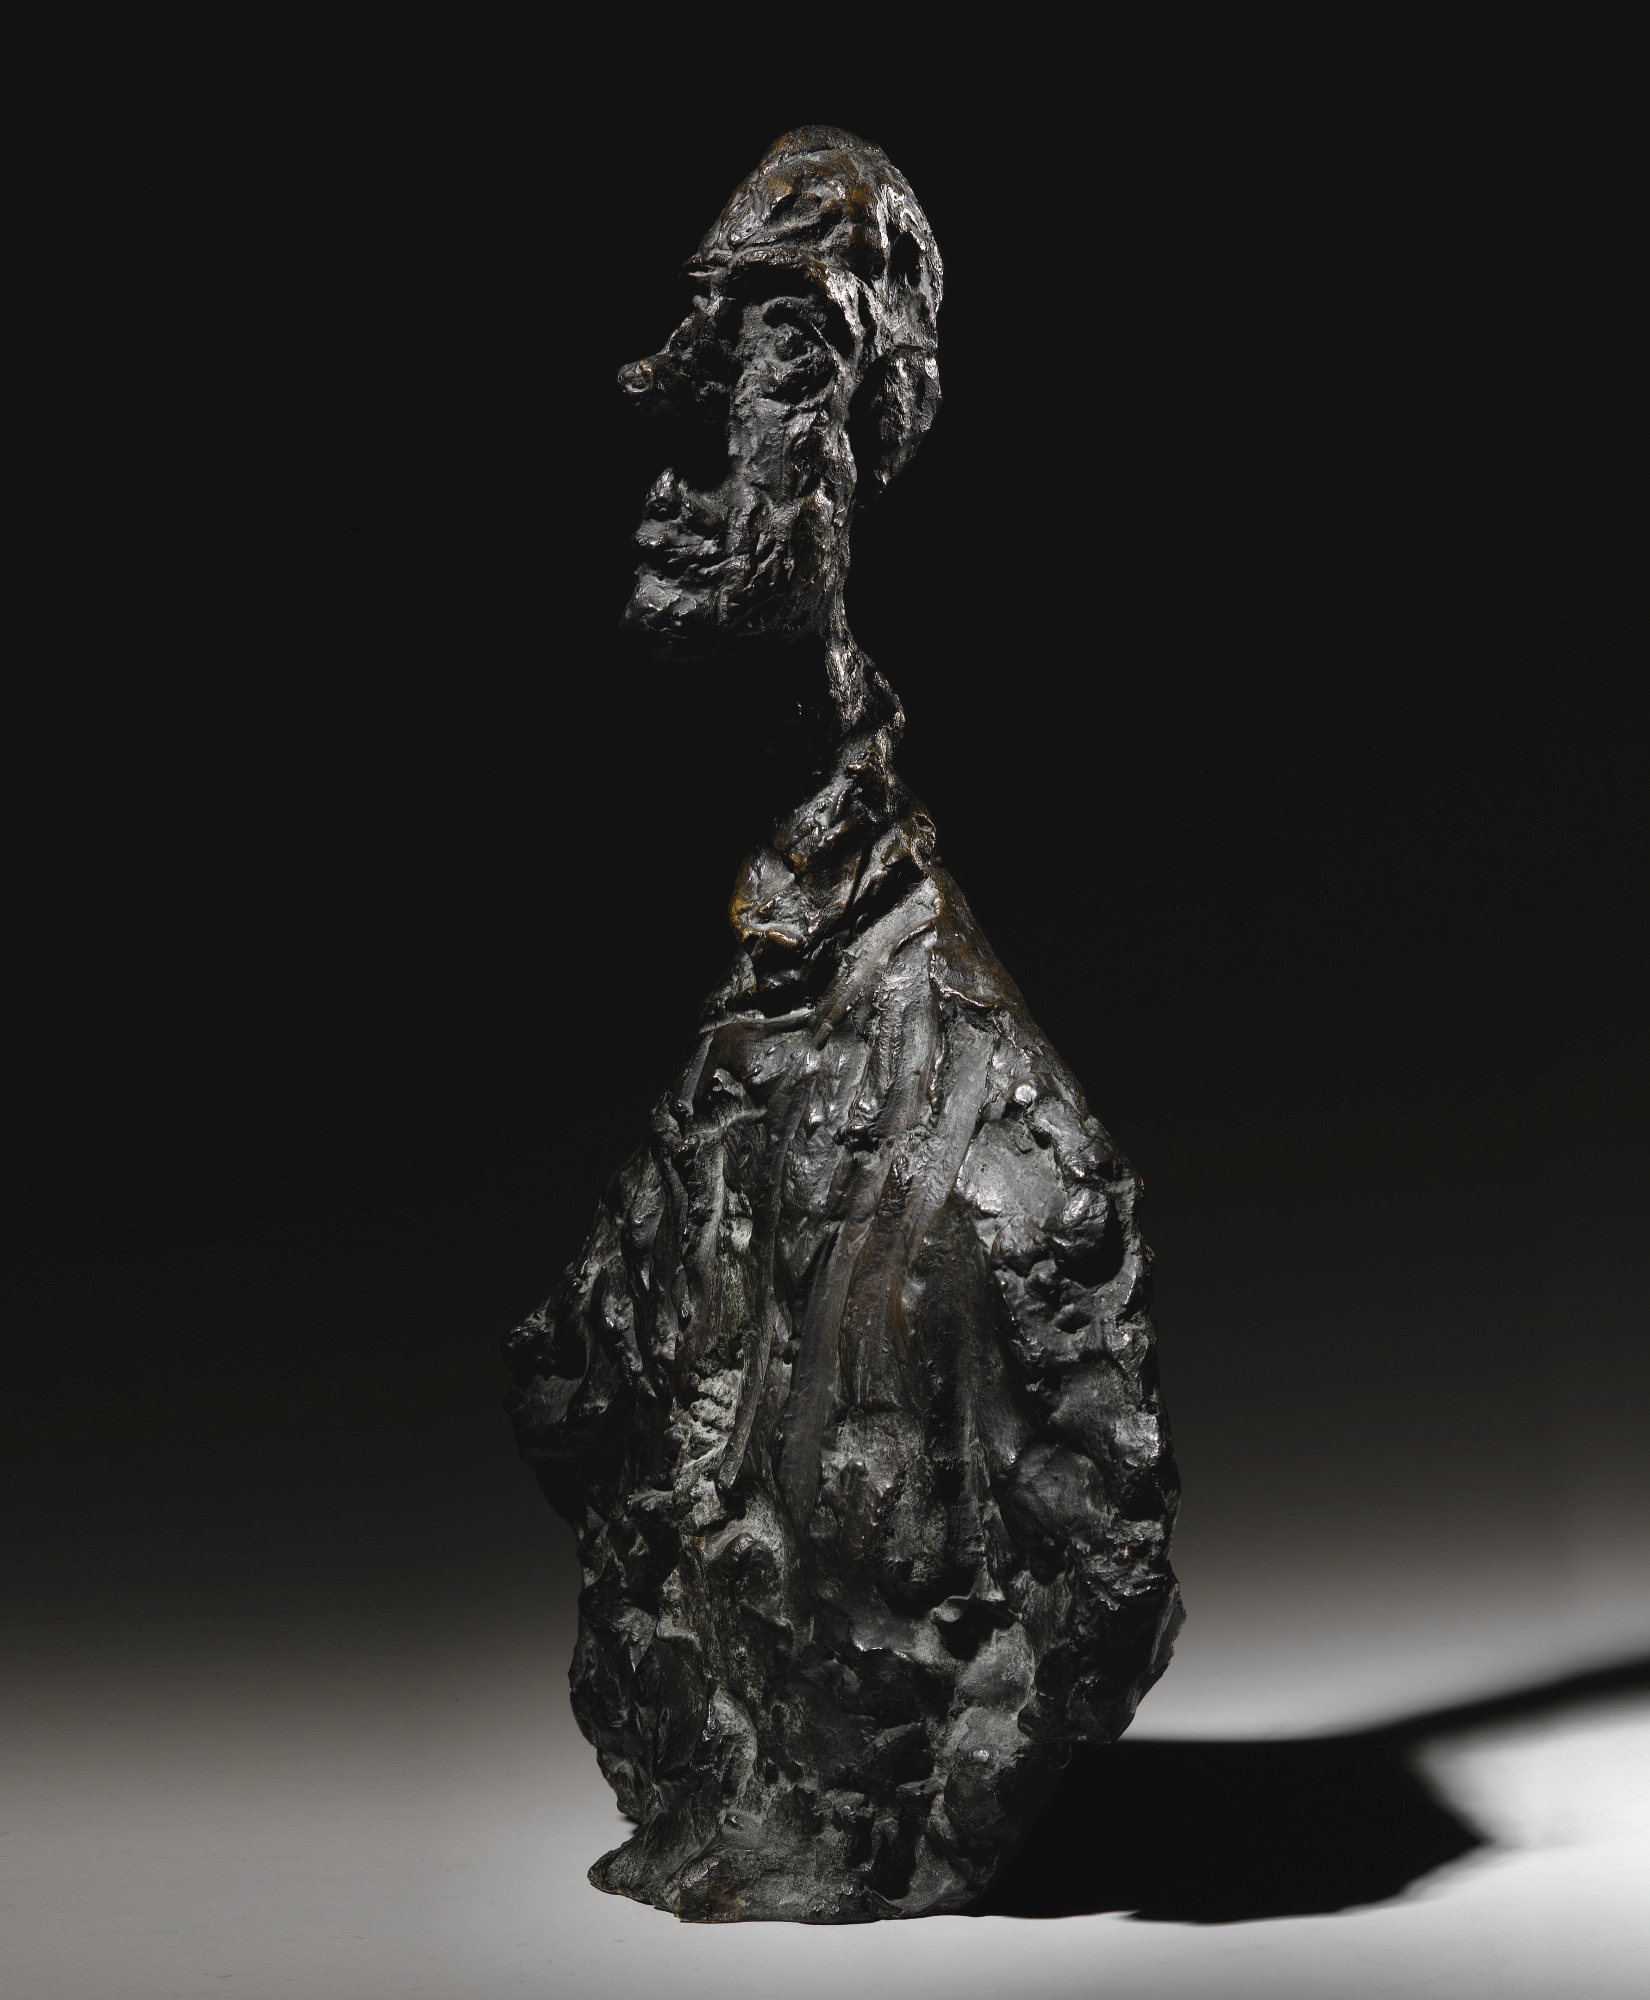 DIEGO (BUSTE AU GRAND NEZ) by Alberto Giacometti, Conceived in 1958, this example cast in 1959-60.